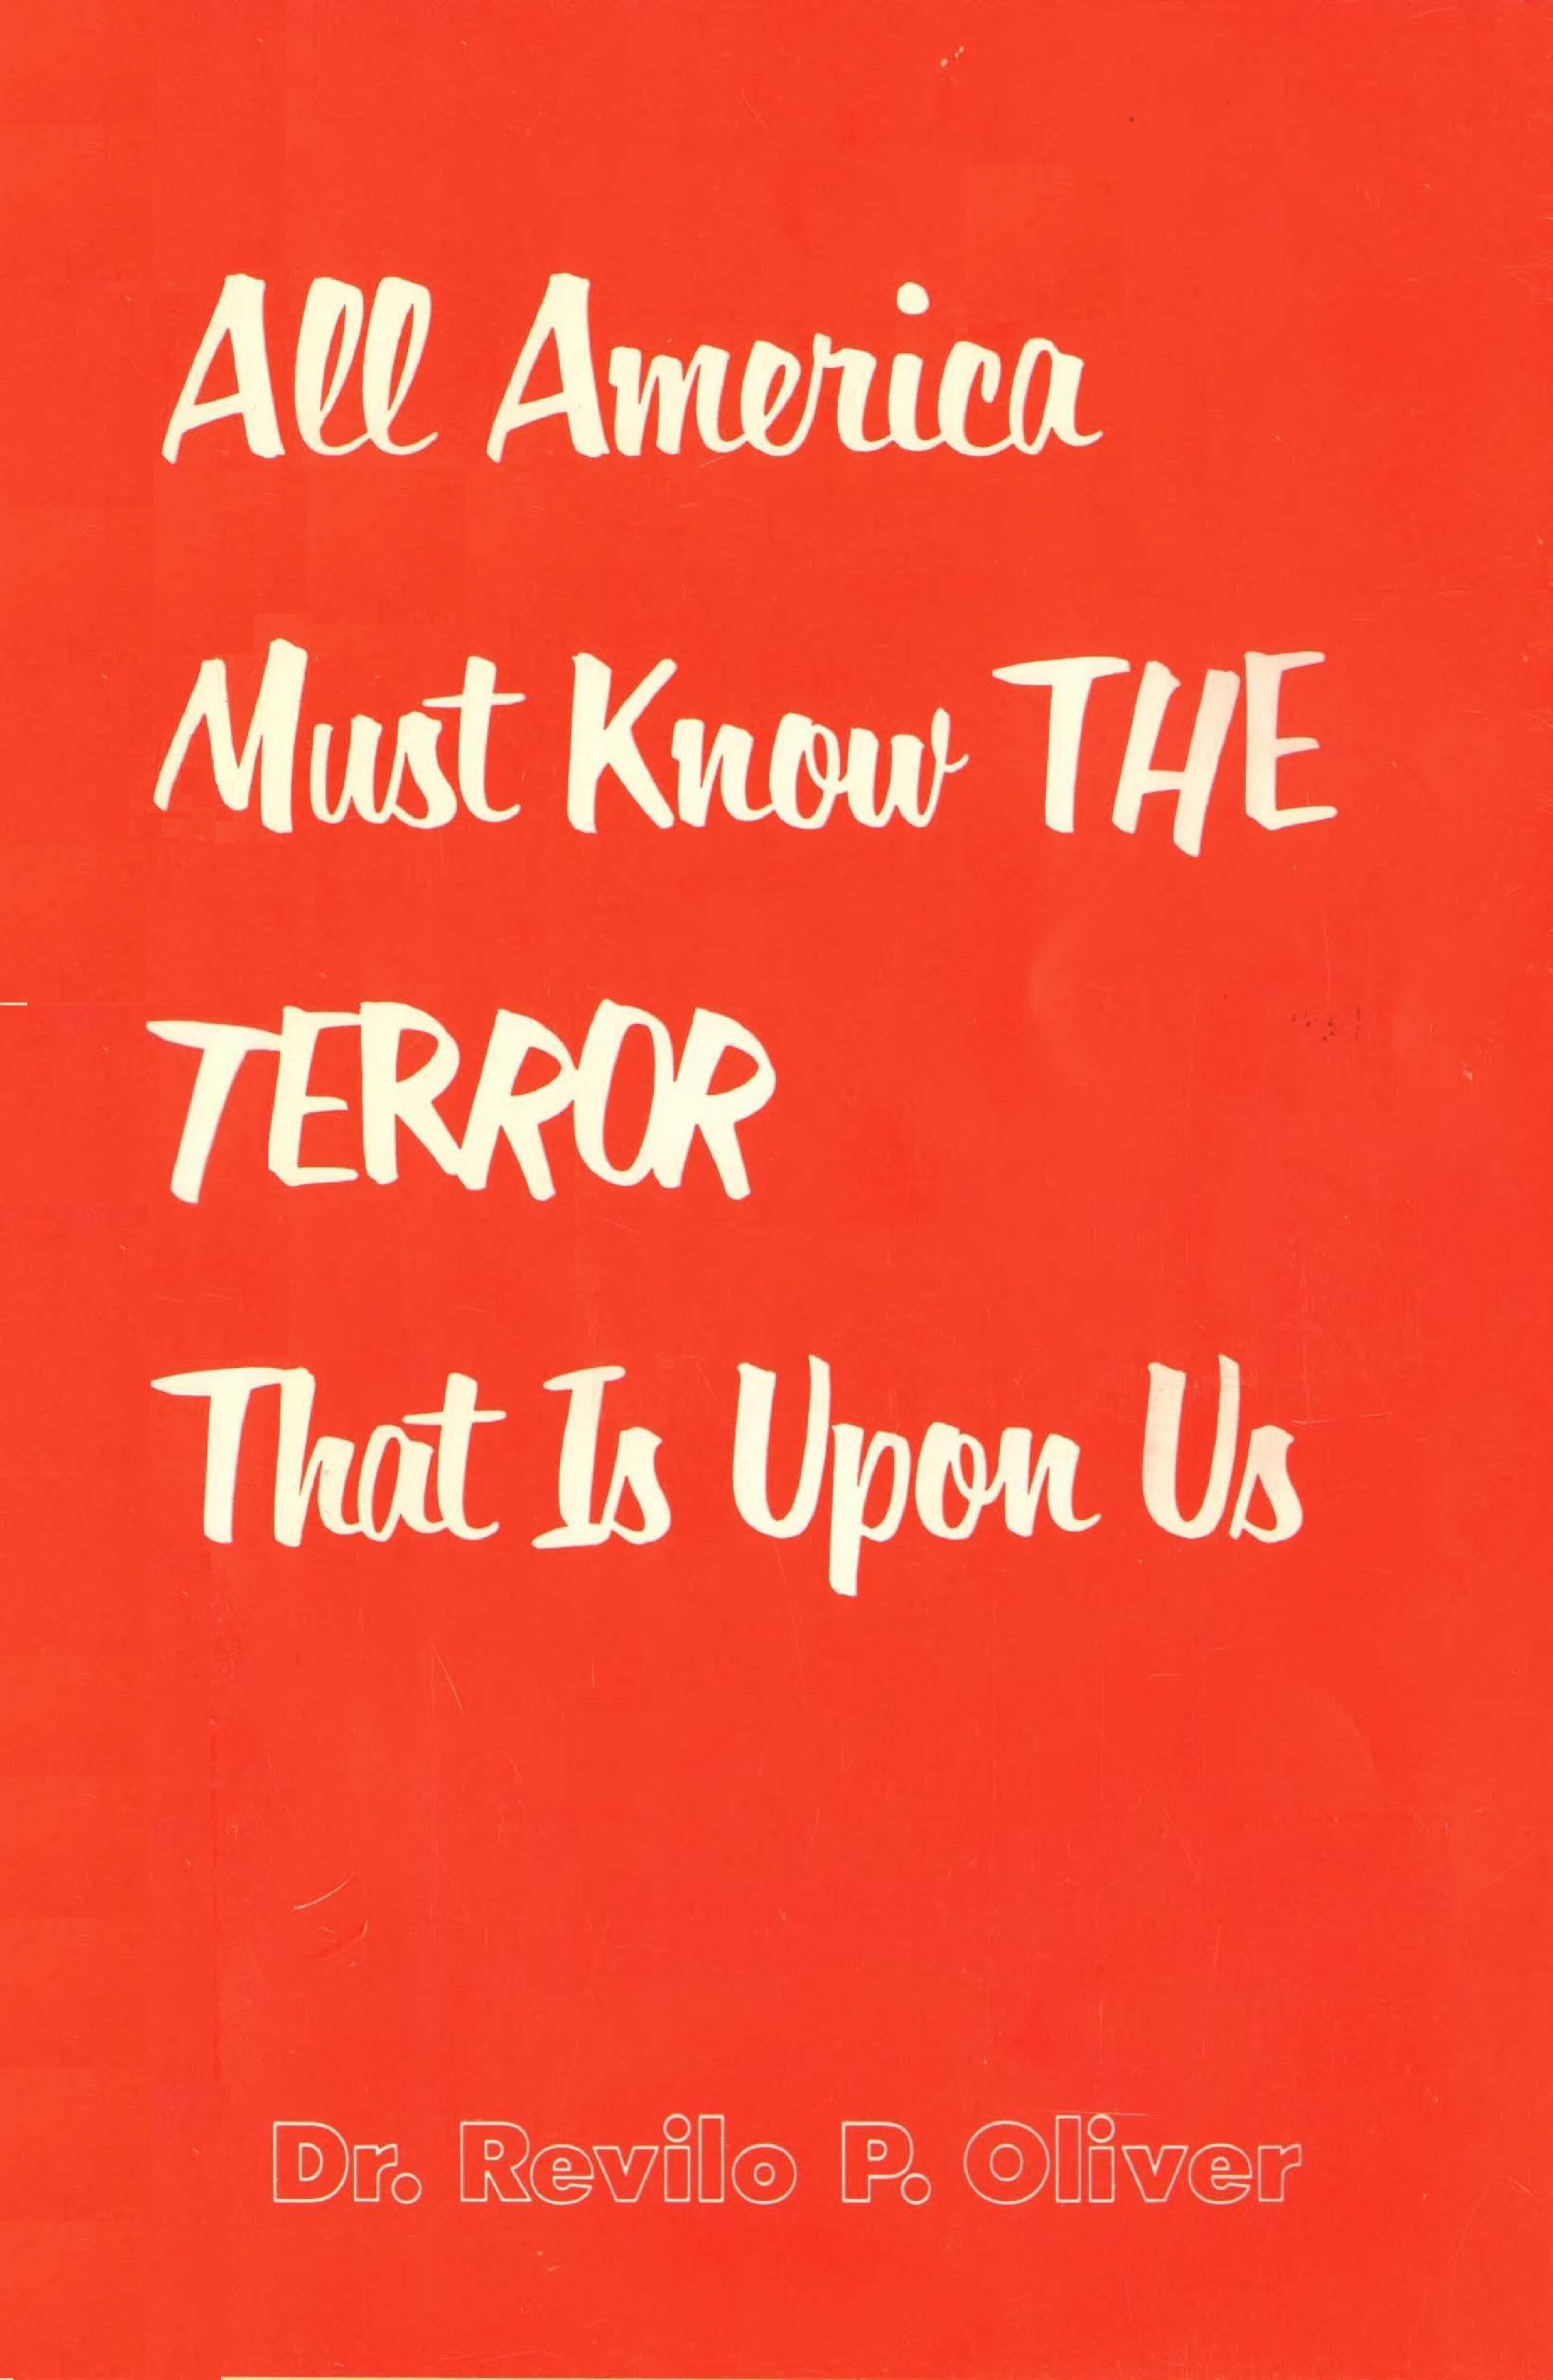 Oliver, Revilo P.; All America Must Know the Terror That is Upon Us